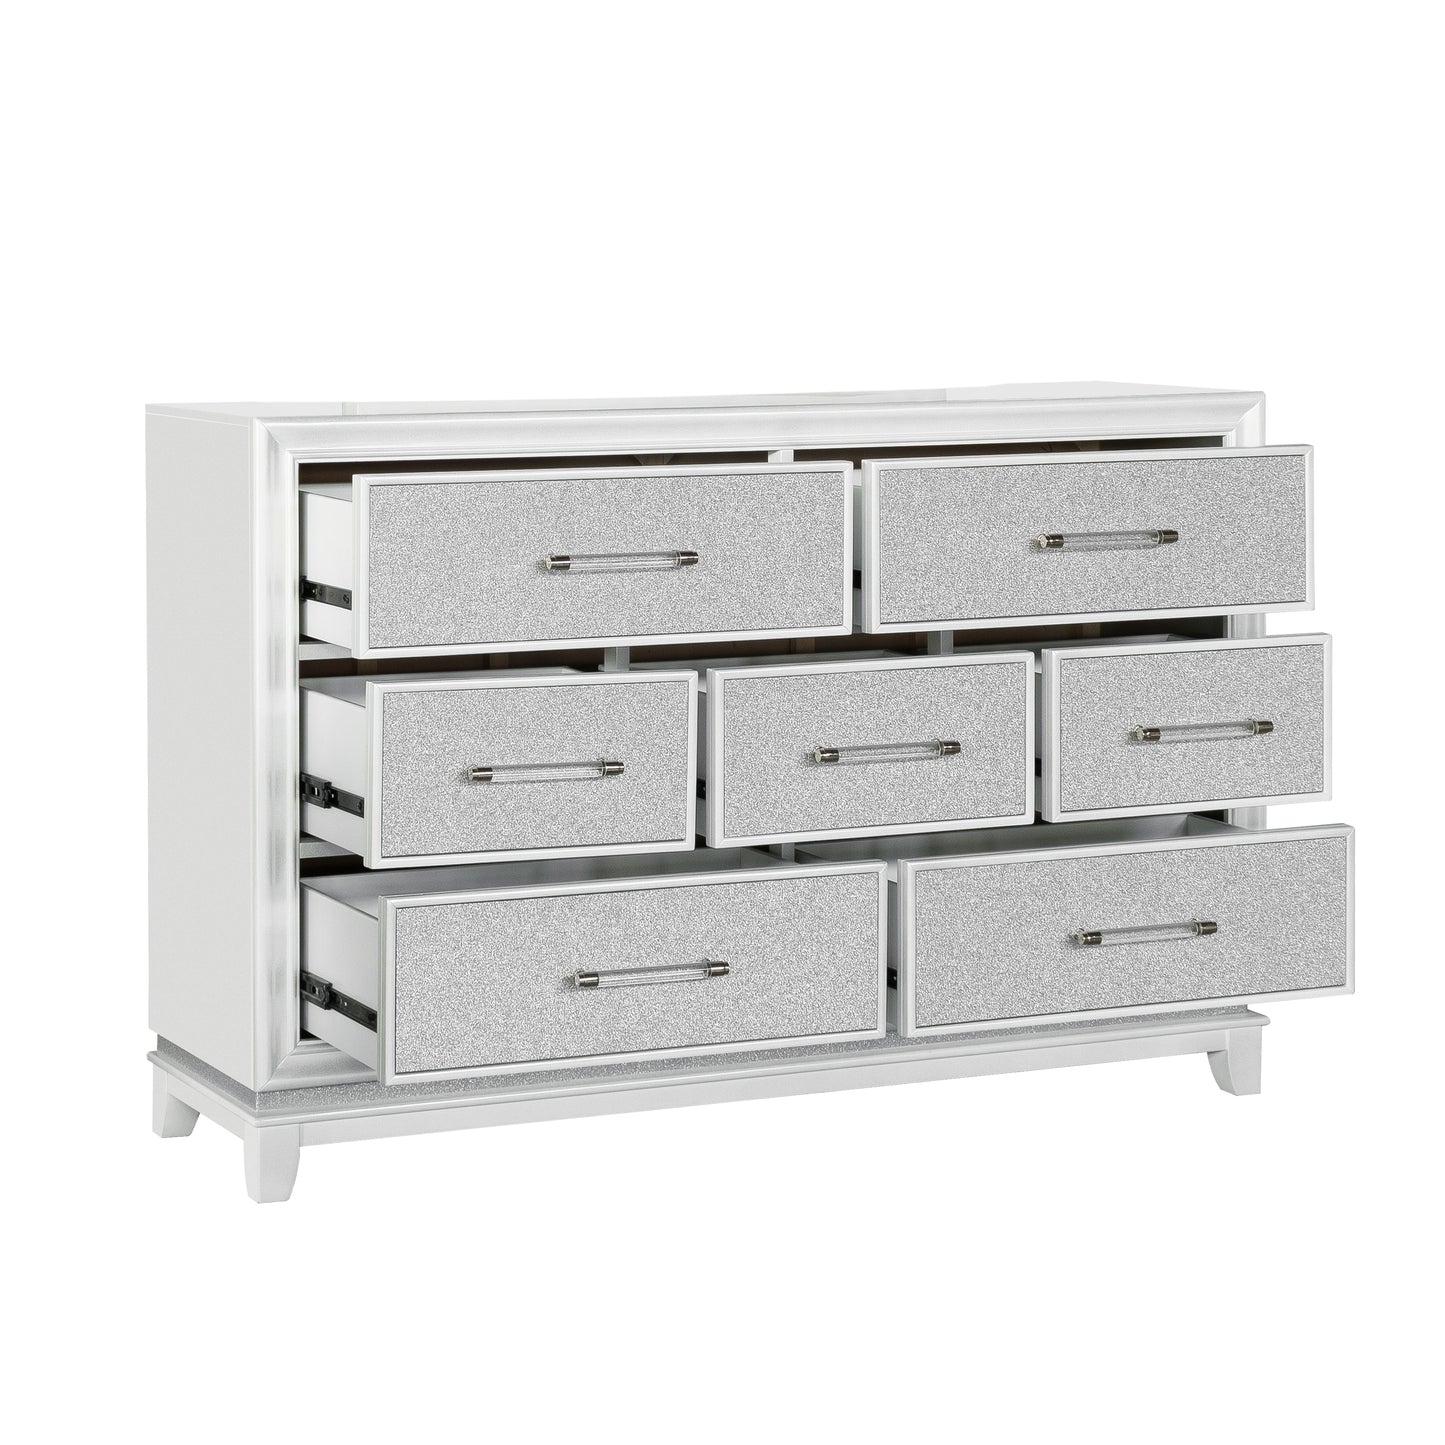 Galaxy 7-Drawer Bedroom Dresser with LED Lights, Pearlized White